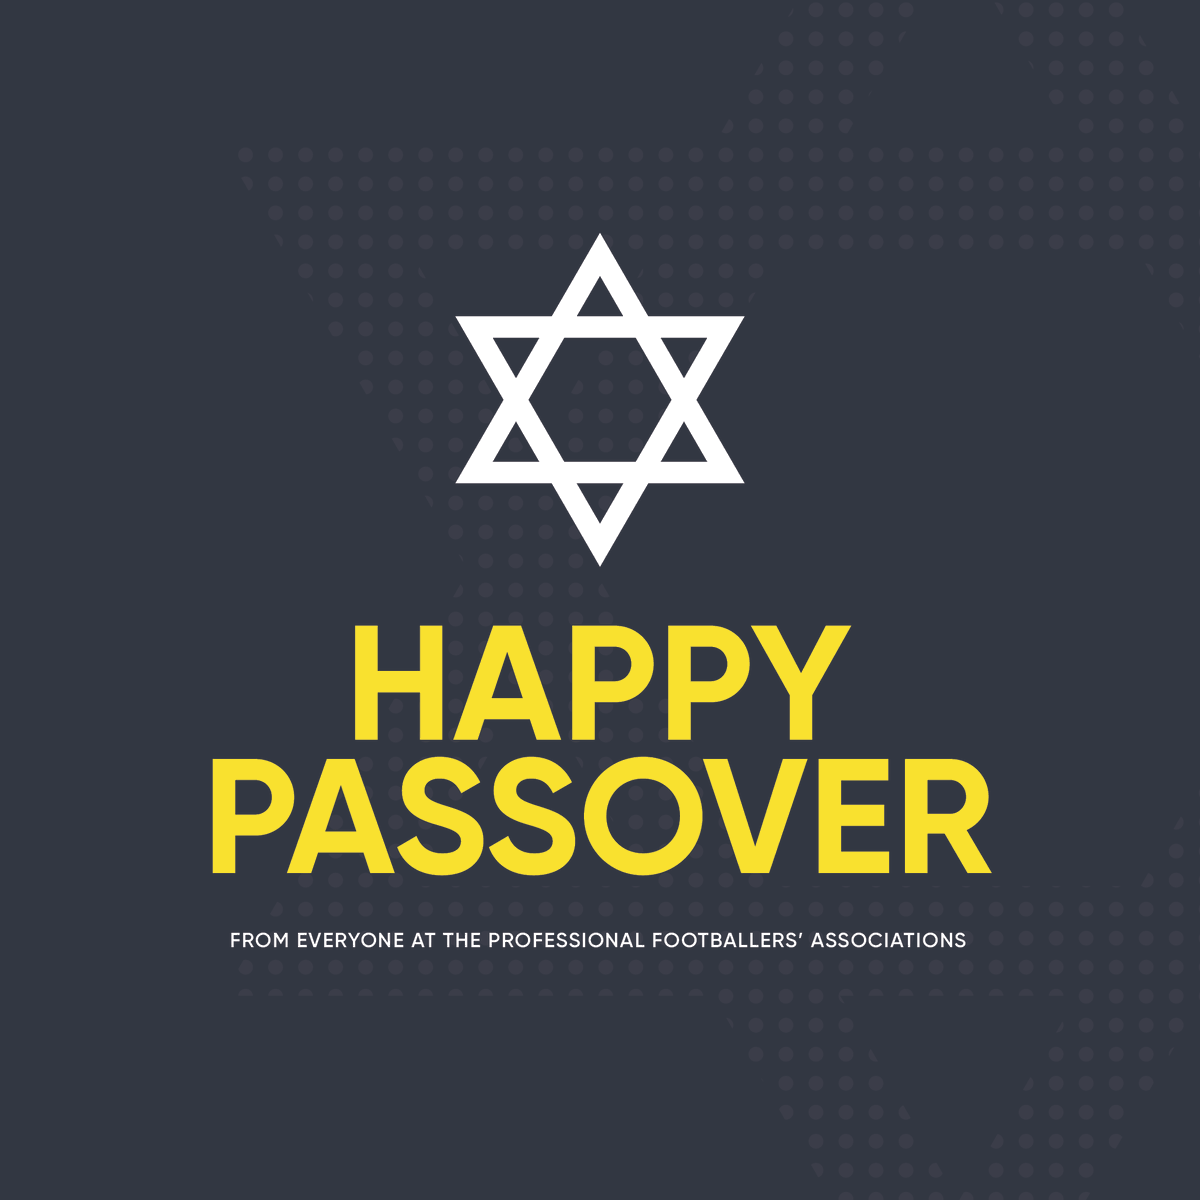 Happy #Passover to PFA members and all those celebrating.